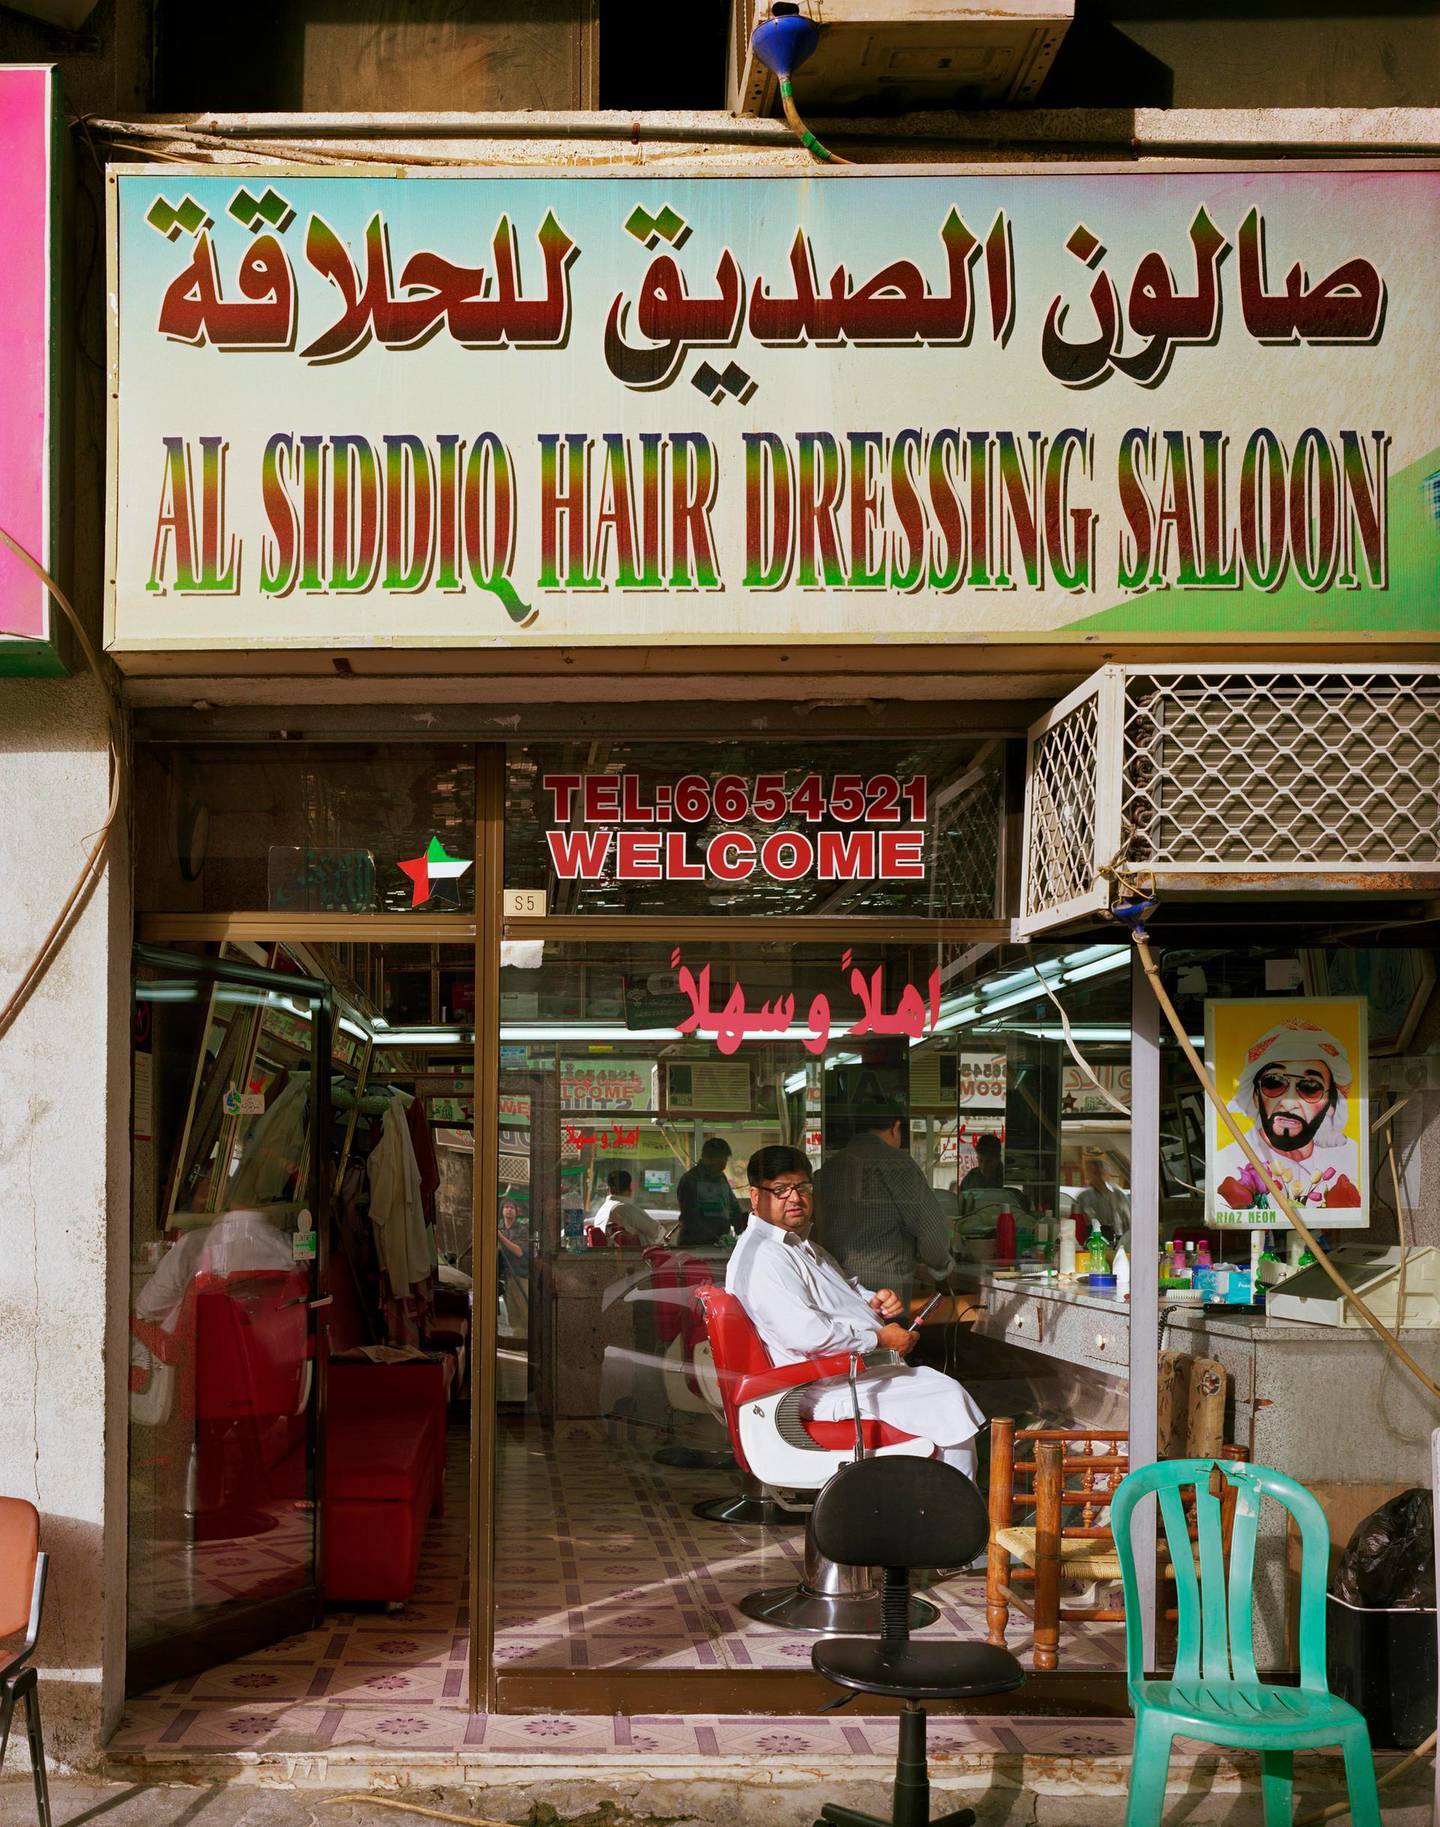 The photographer seeks out the older parts of Abu Dhabi, such as the Al Siddiq Hair Salon. Photo by Andrew Moore